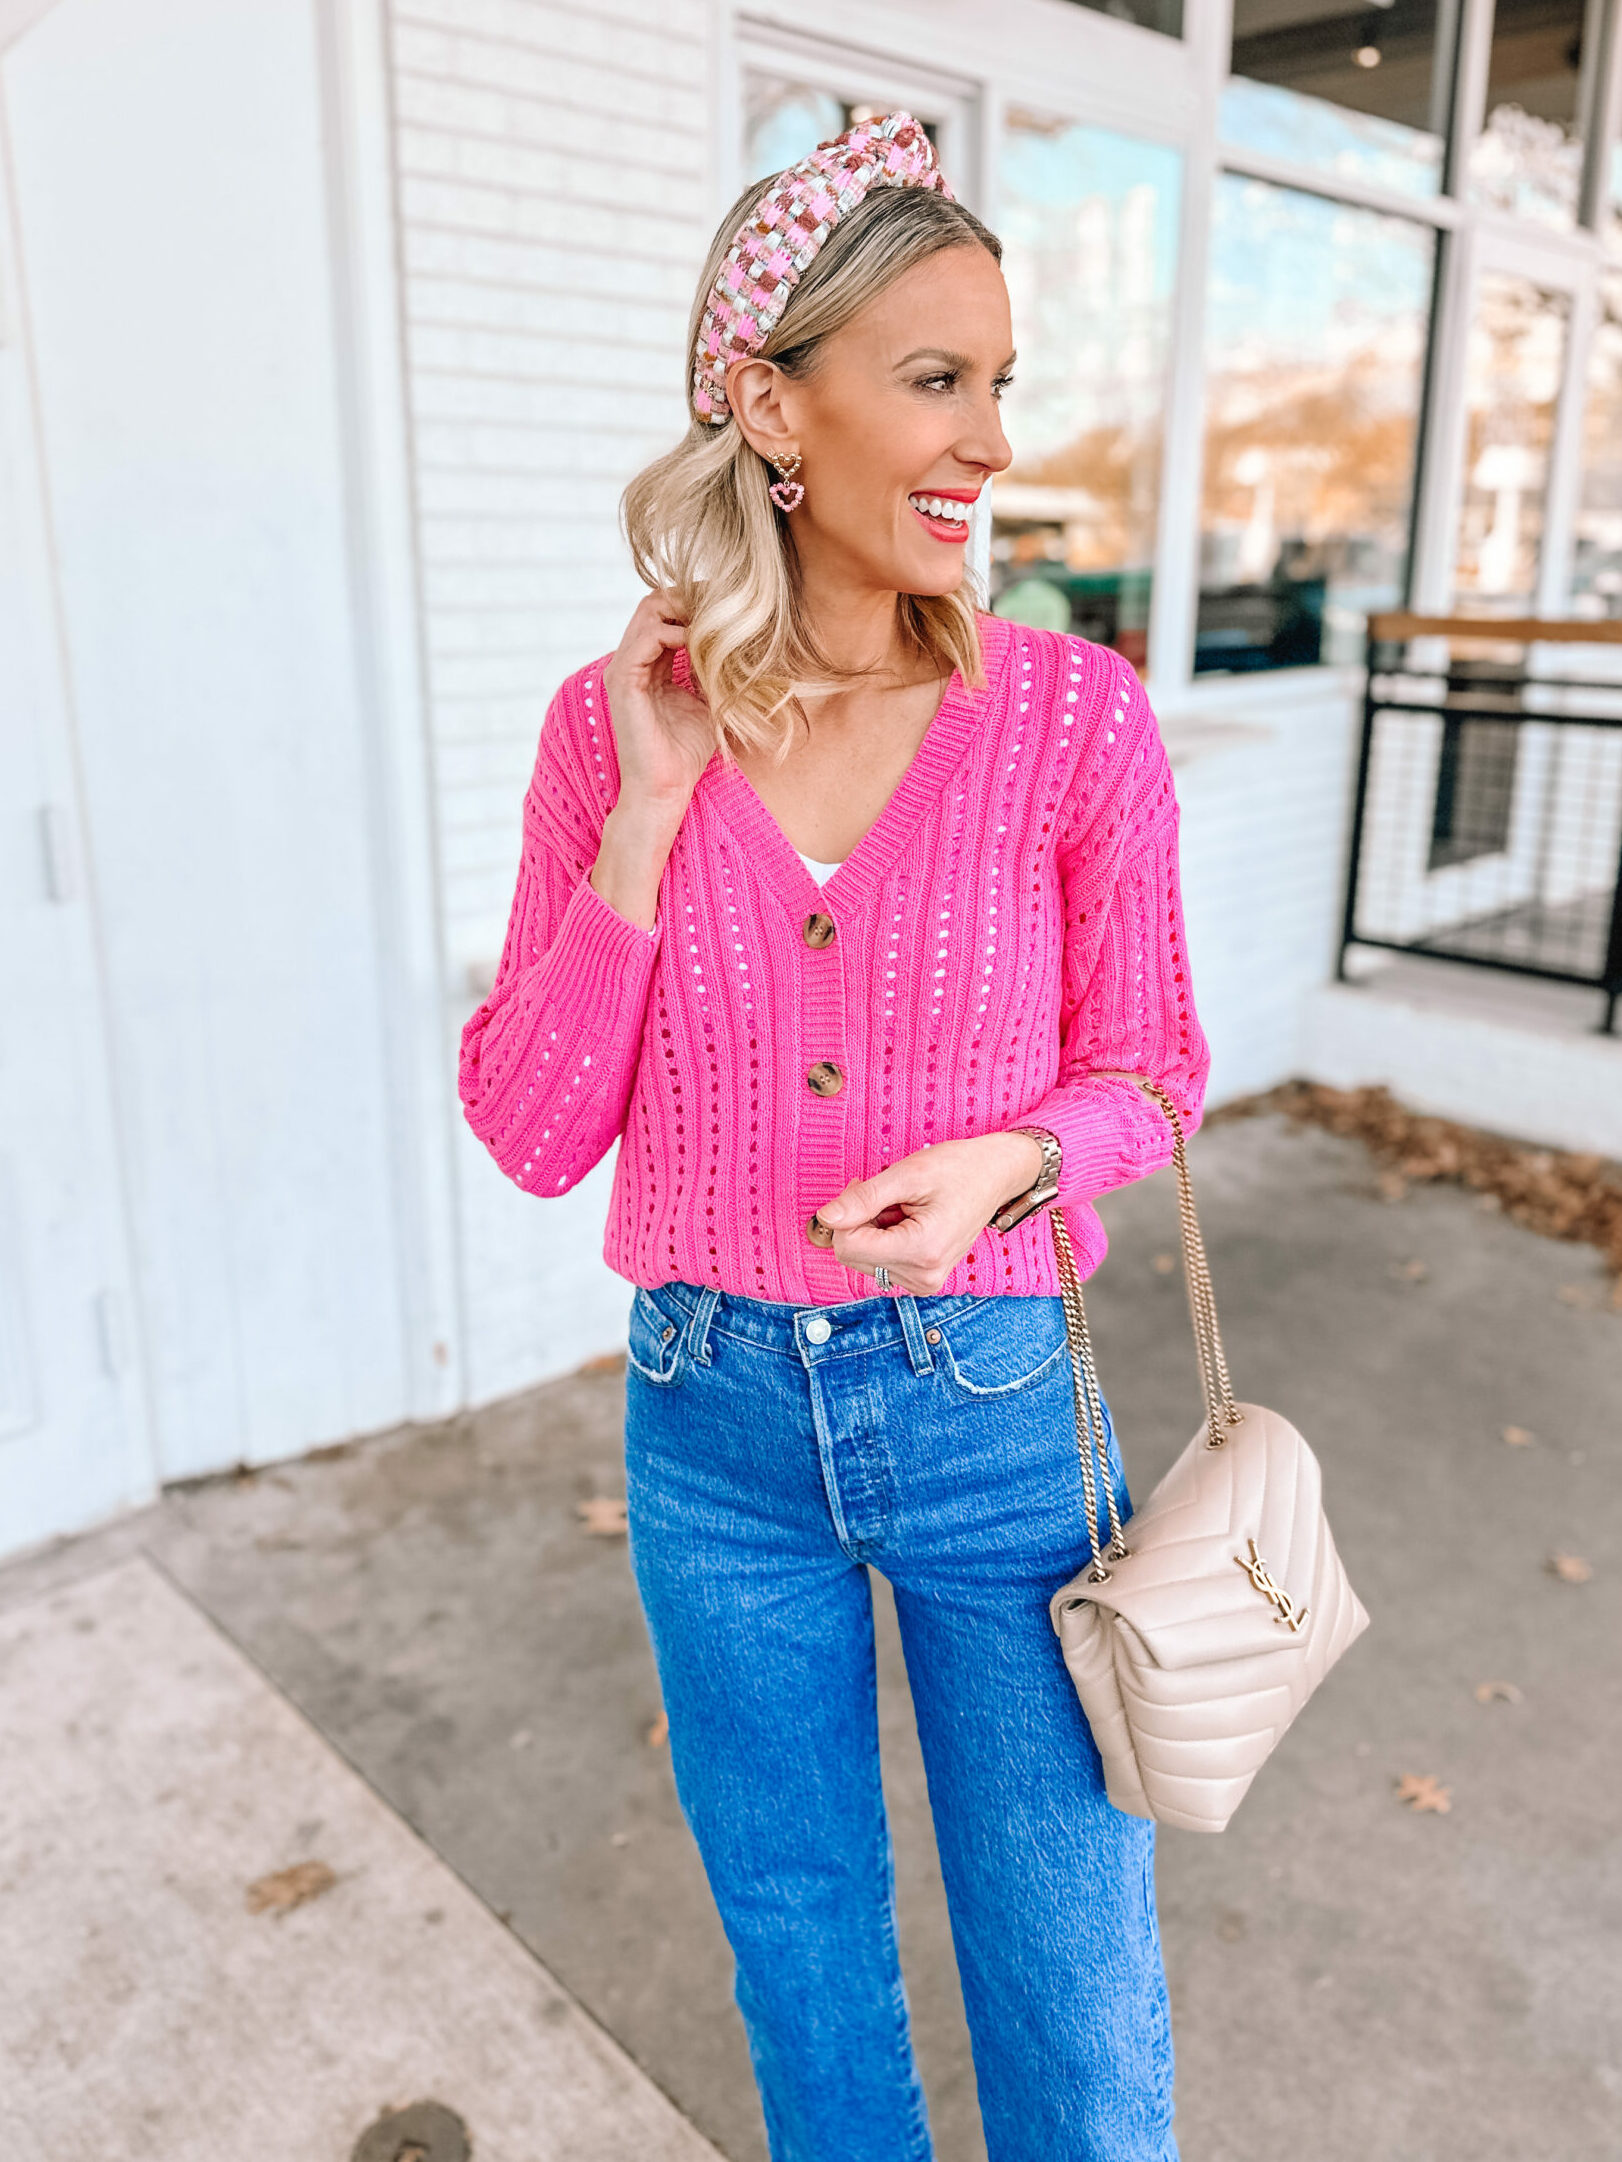 How adorable is this $17 Walmart cardigan?! The bright pink is so fun and perfect to pair with other fun accessories for a Valentine's Day vibe!